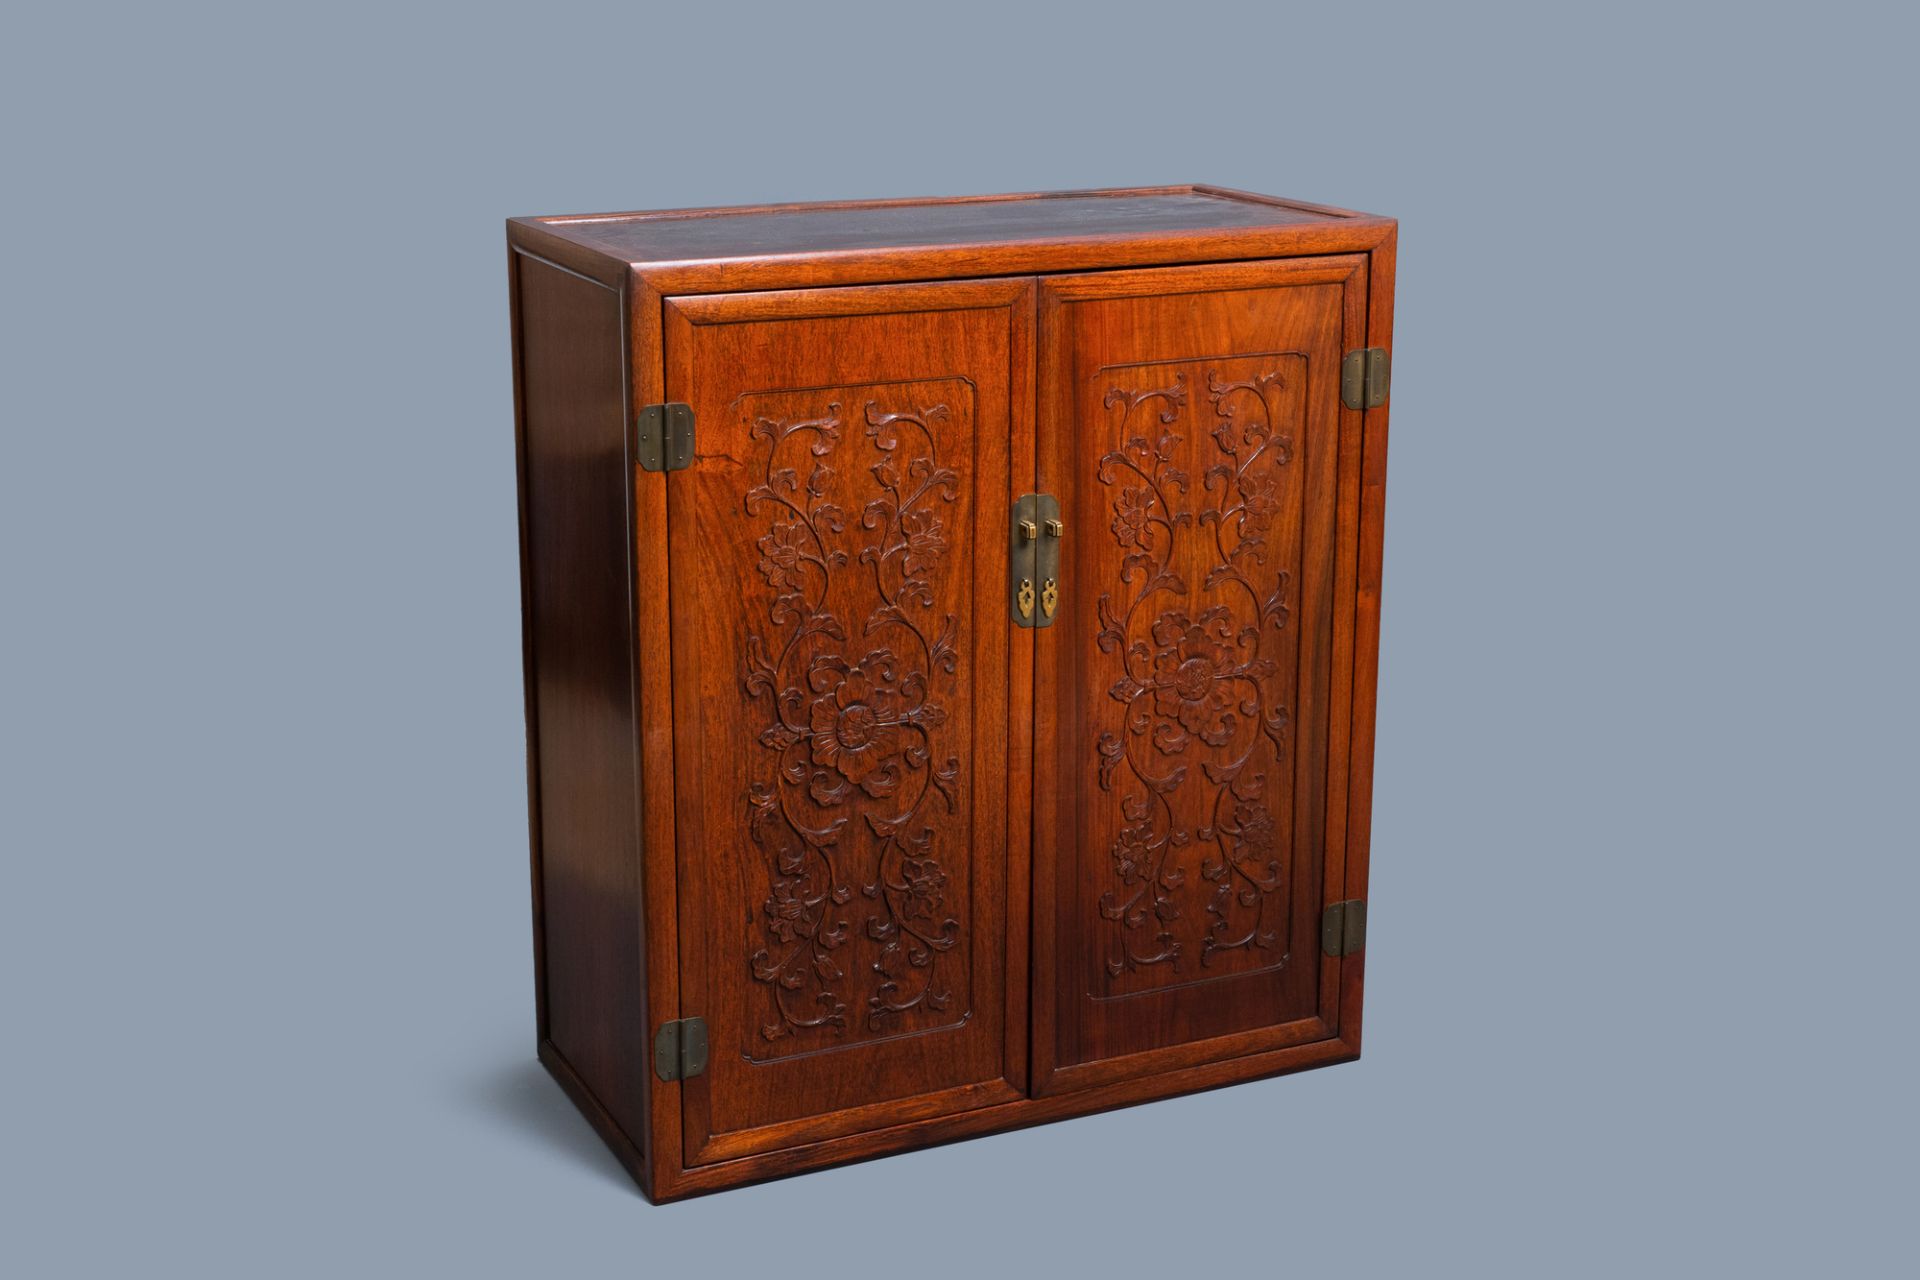 A Chinese wooden two-door cupboard with carved floral panels, 19th C.